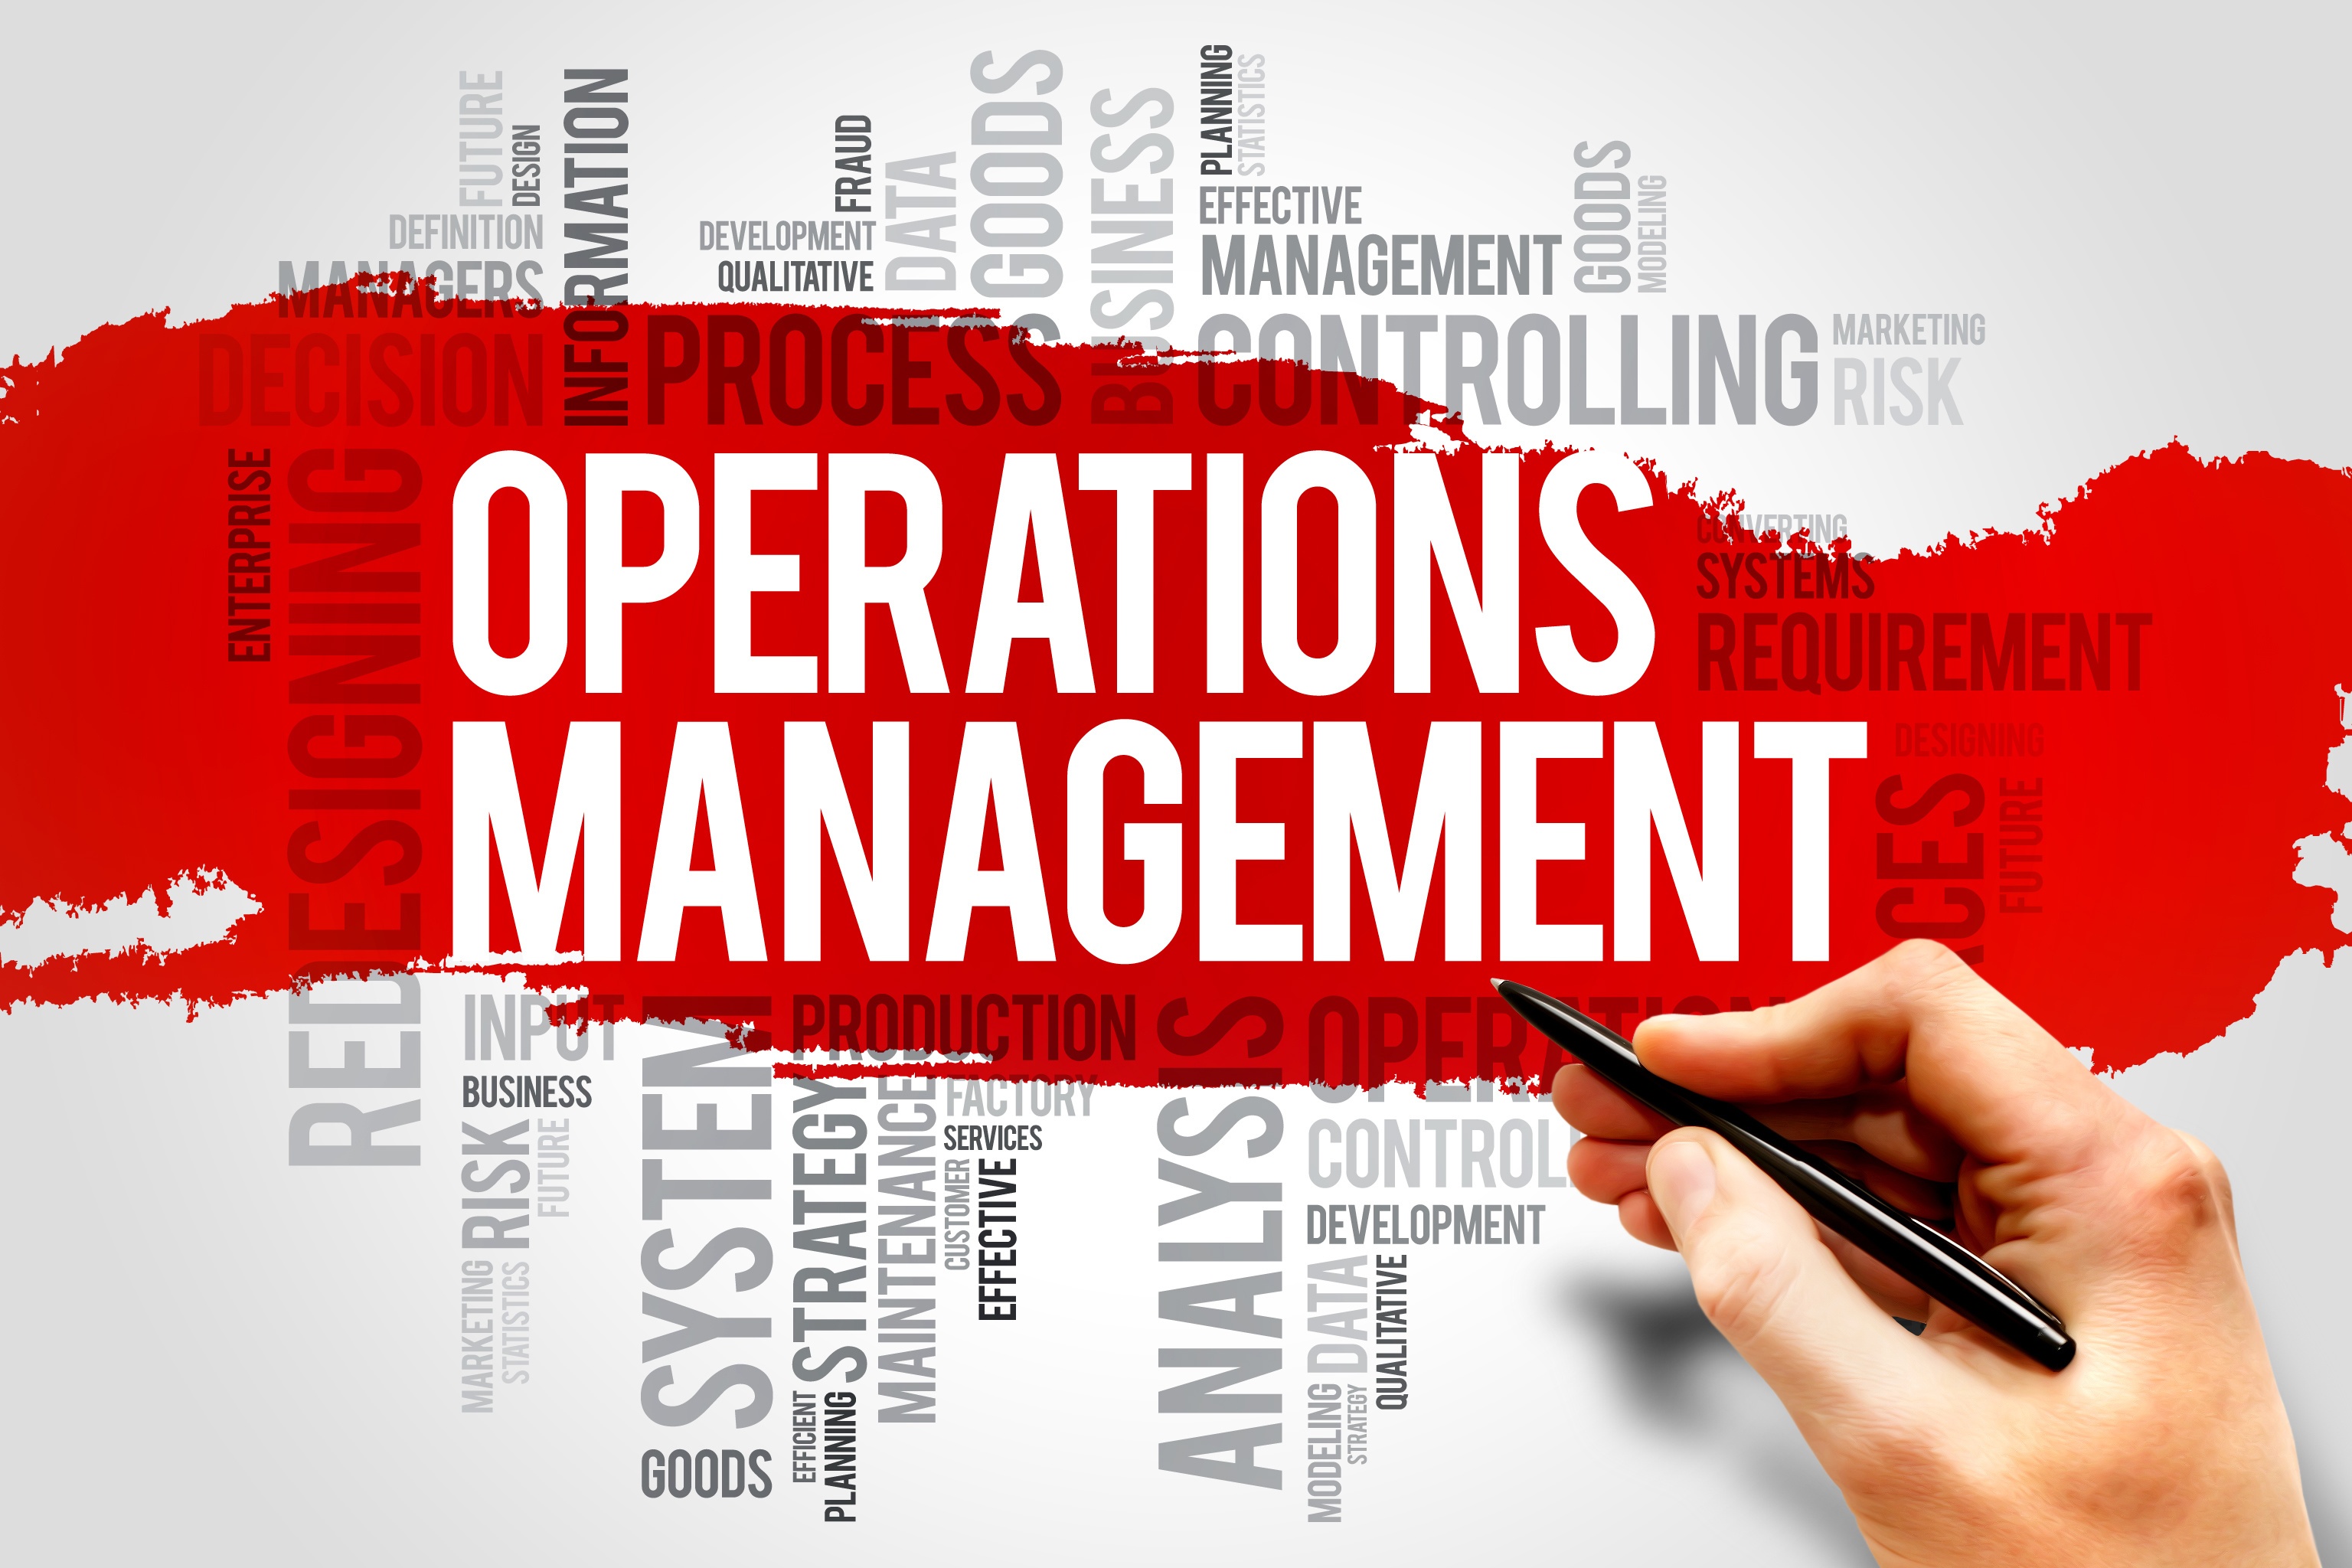 Business Outcomes: The Real Priority When it Comes to IT Operations